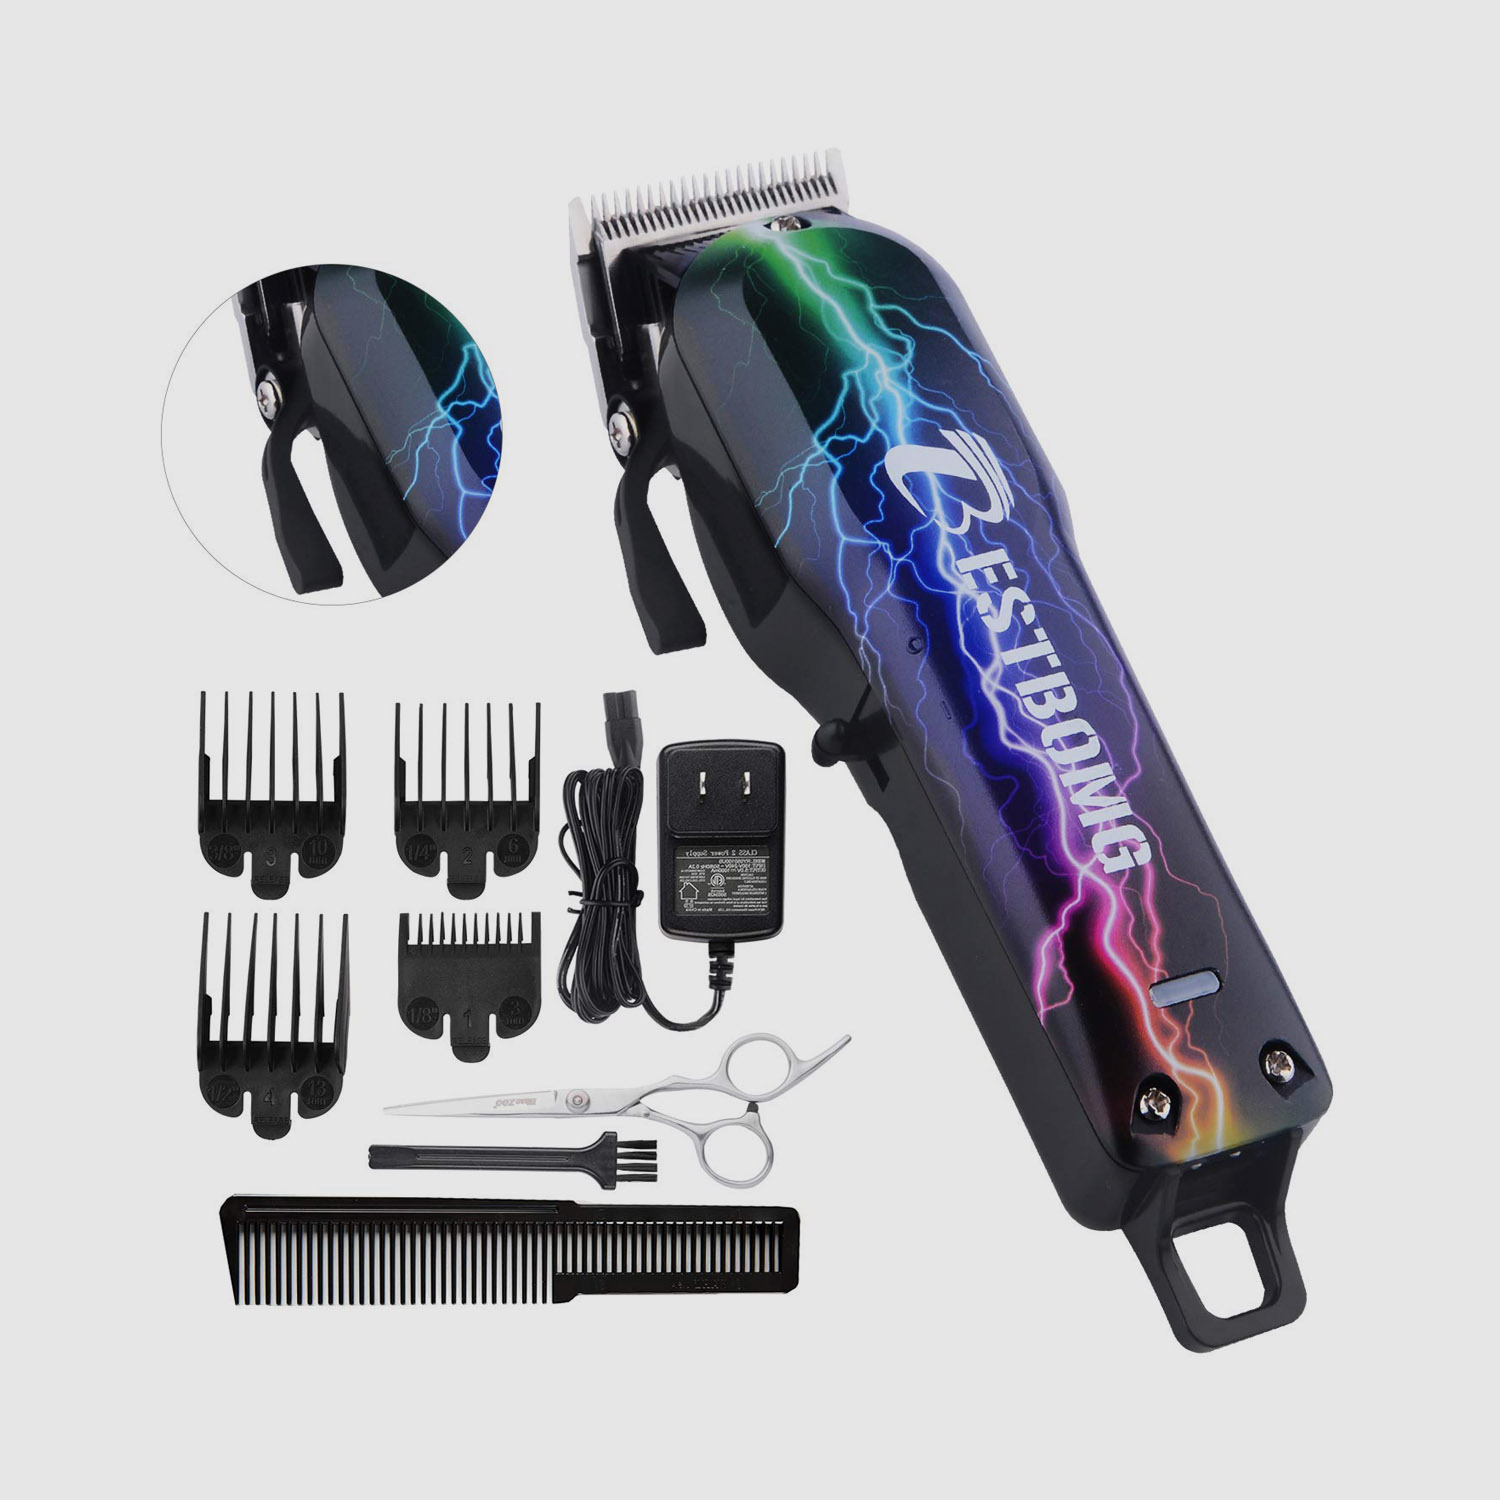 Men's daily necessities: hair clippers